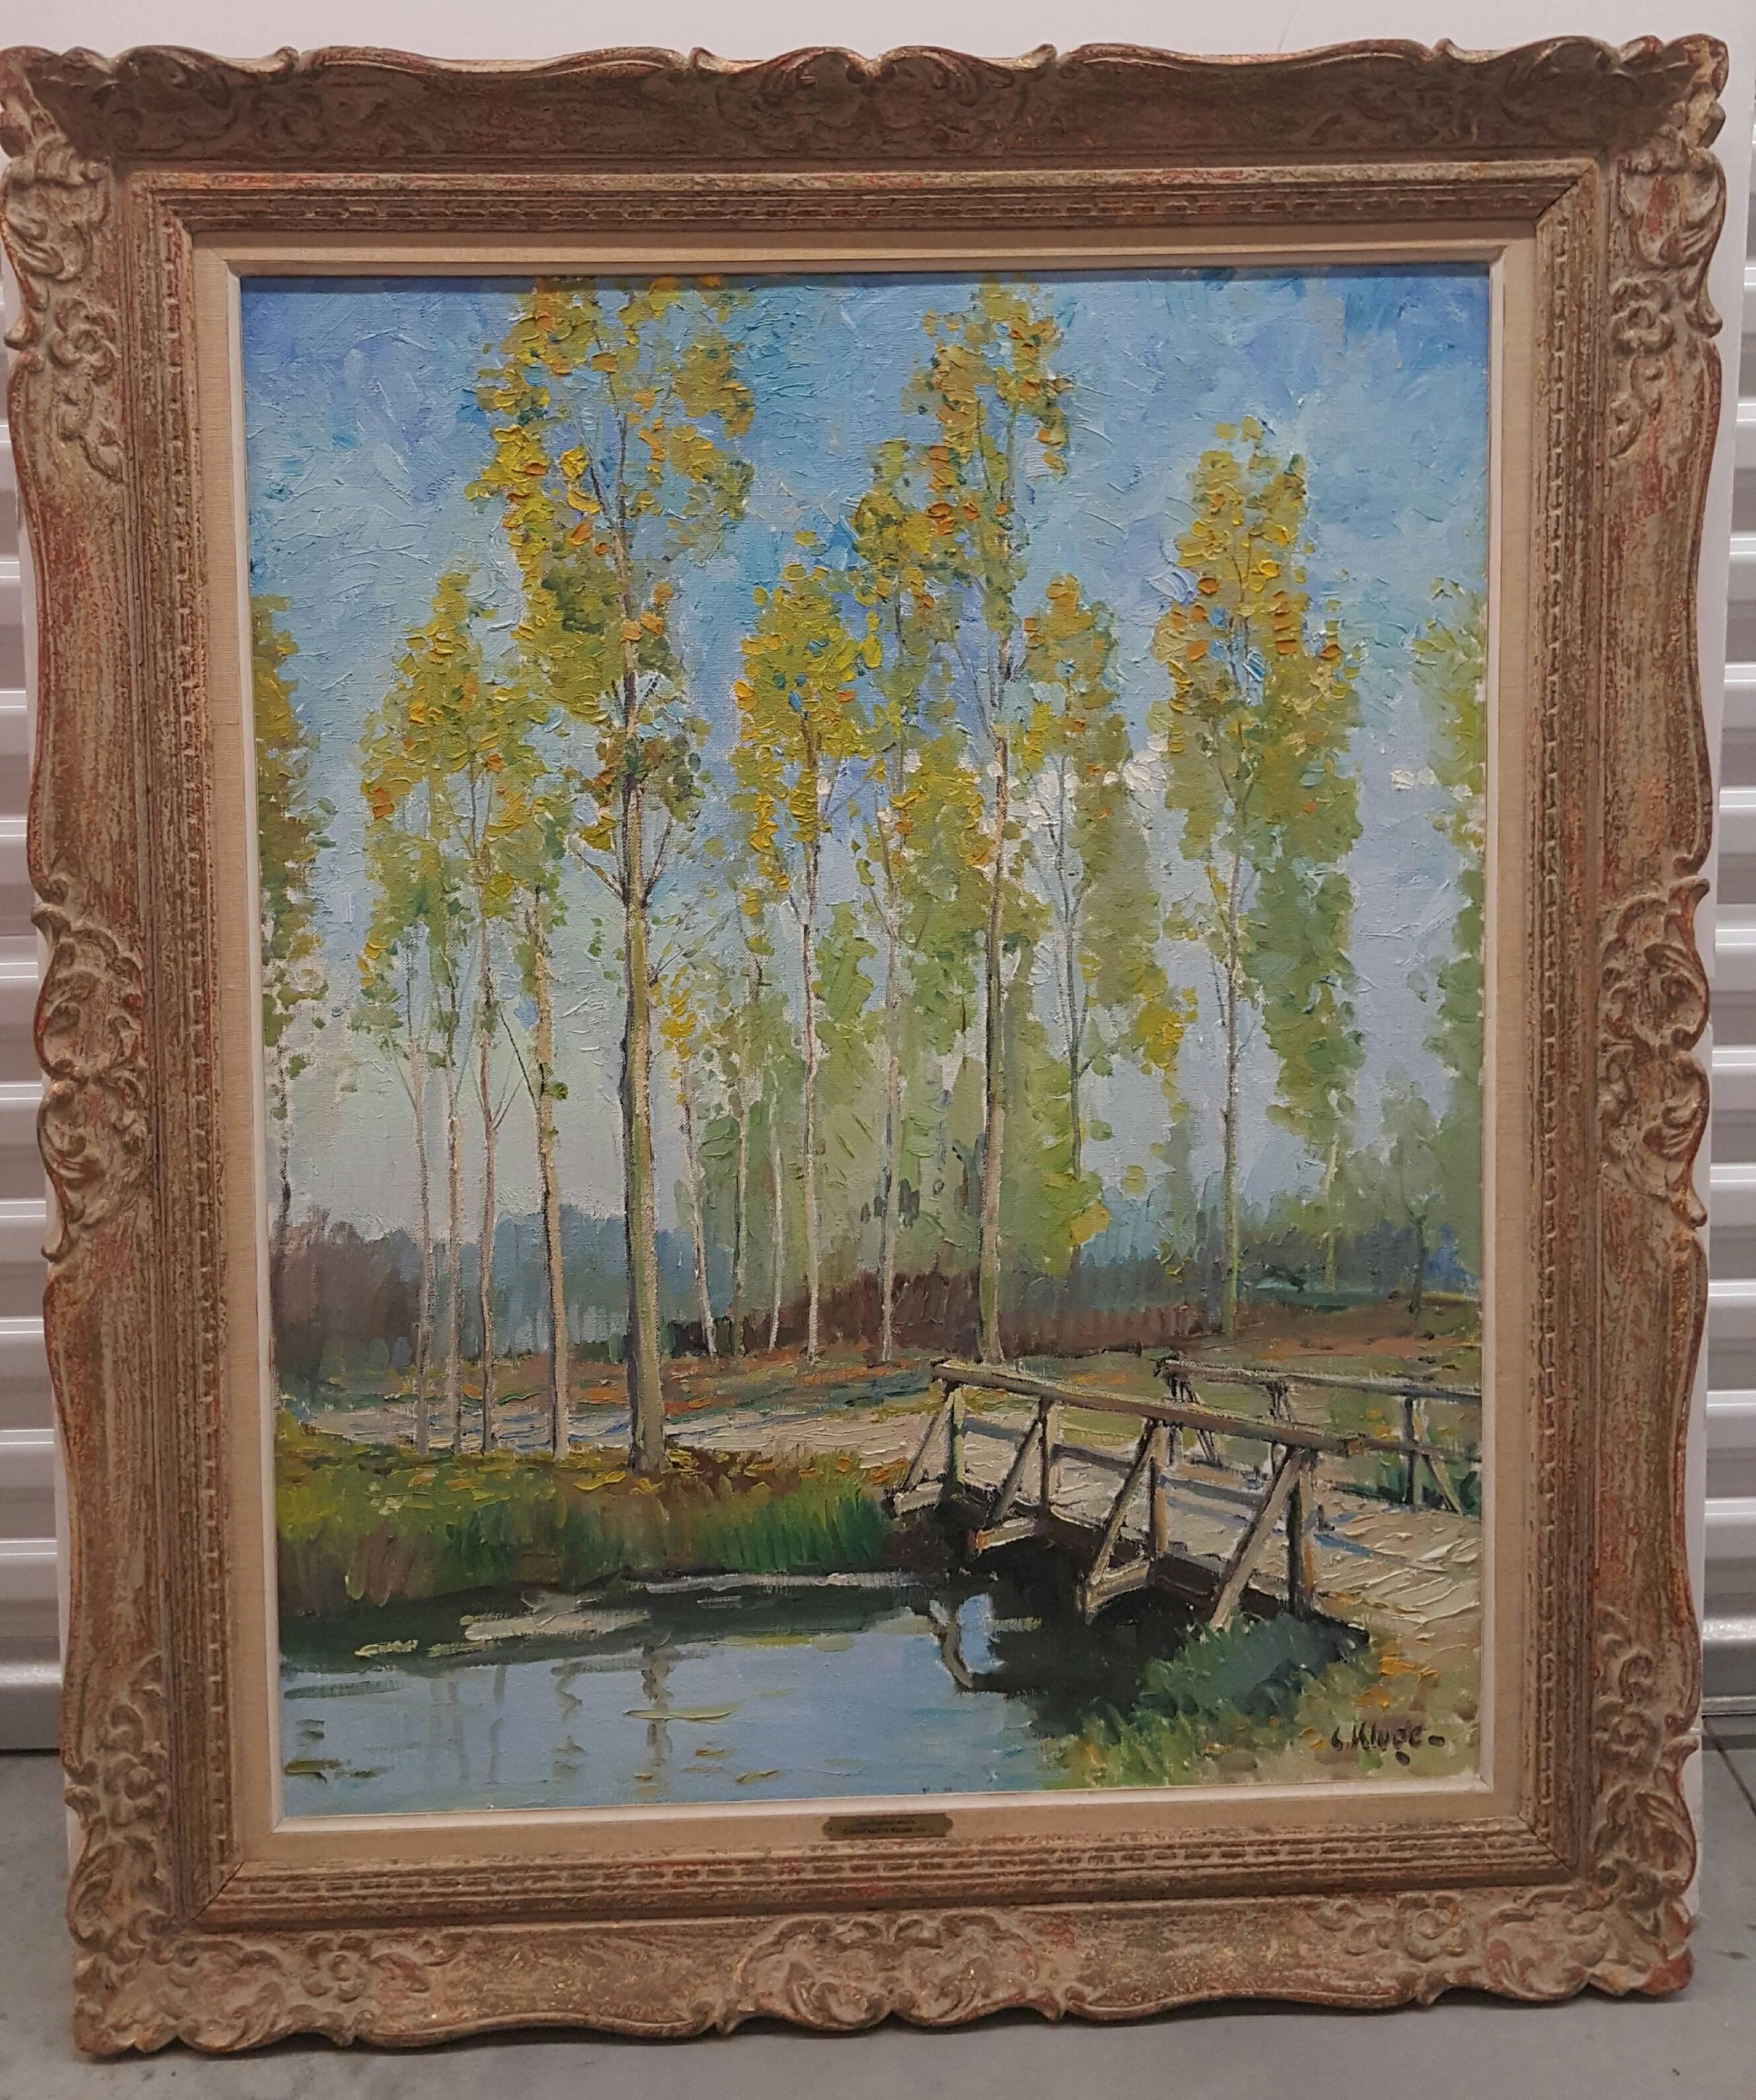 Golden Poplars - Painting by Constantine Kluge